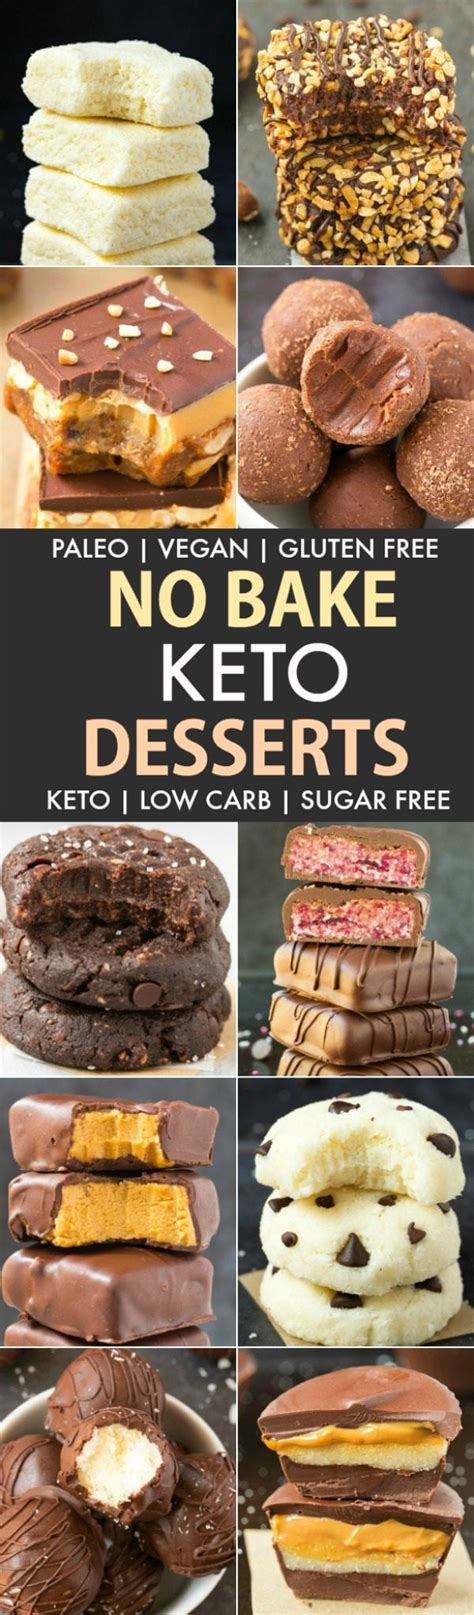 They are gluten free and low sugar brownies and two favorite desserts combined into one tasty dessert! Easy No Bake Low Carb Keto Desserts (Paleo, Vegan)